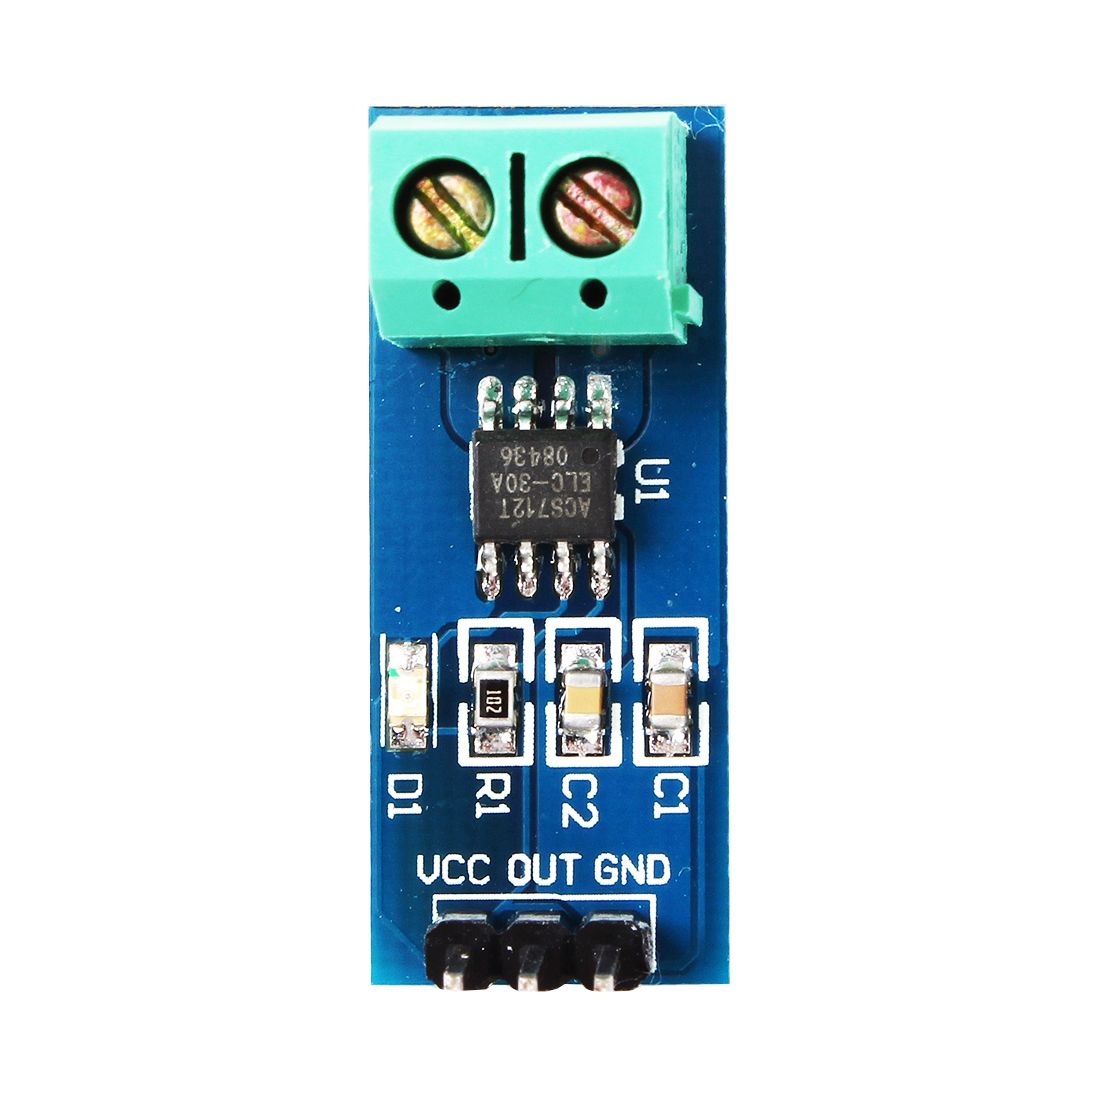 50pcs-5V-30A-ACS712-Ranging-Current-Sensor-Module-Board-Geekcreit-for-Arduino---products-that-work-w-1388408